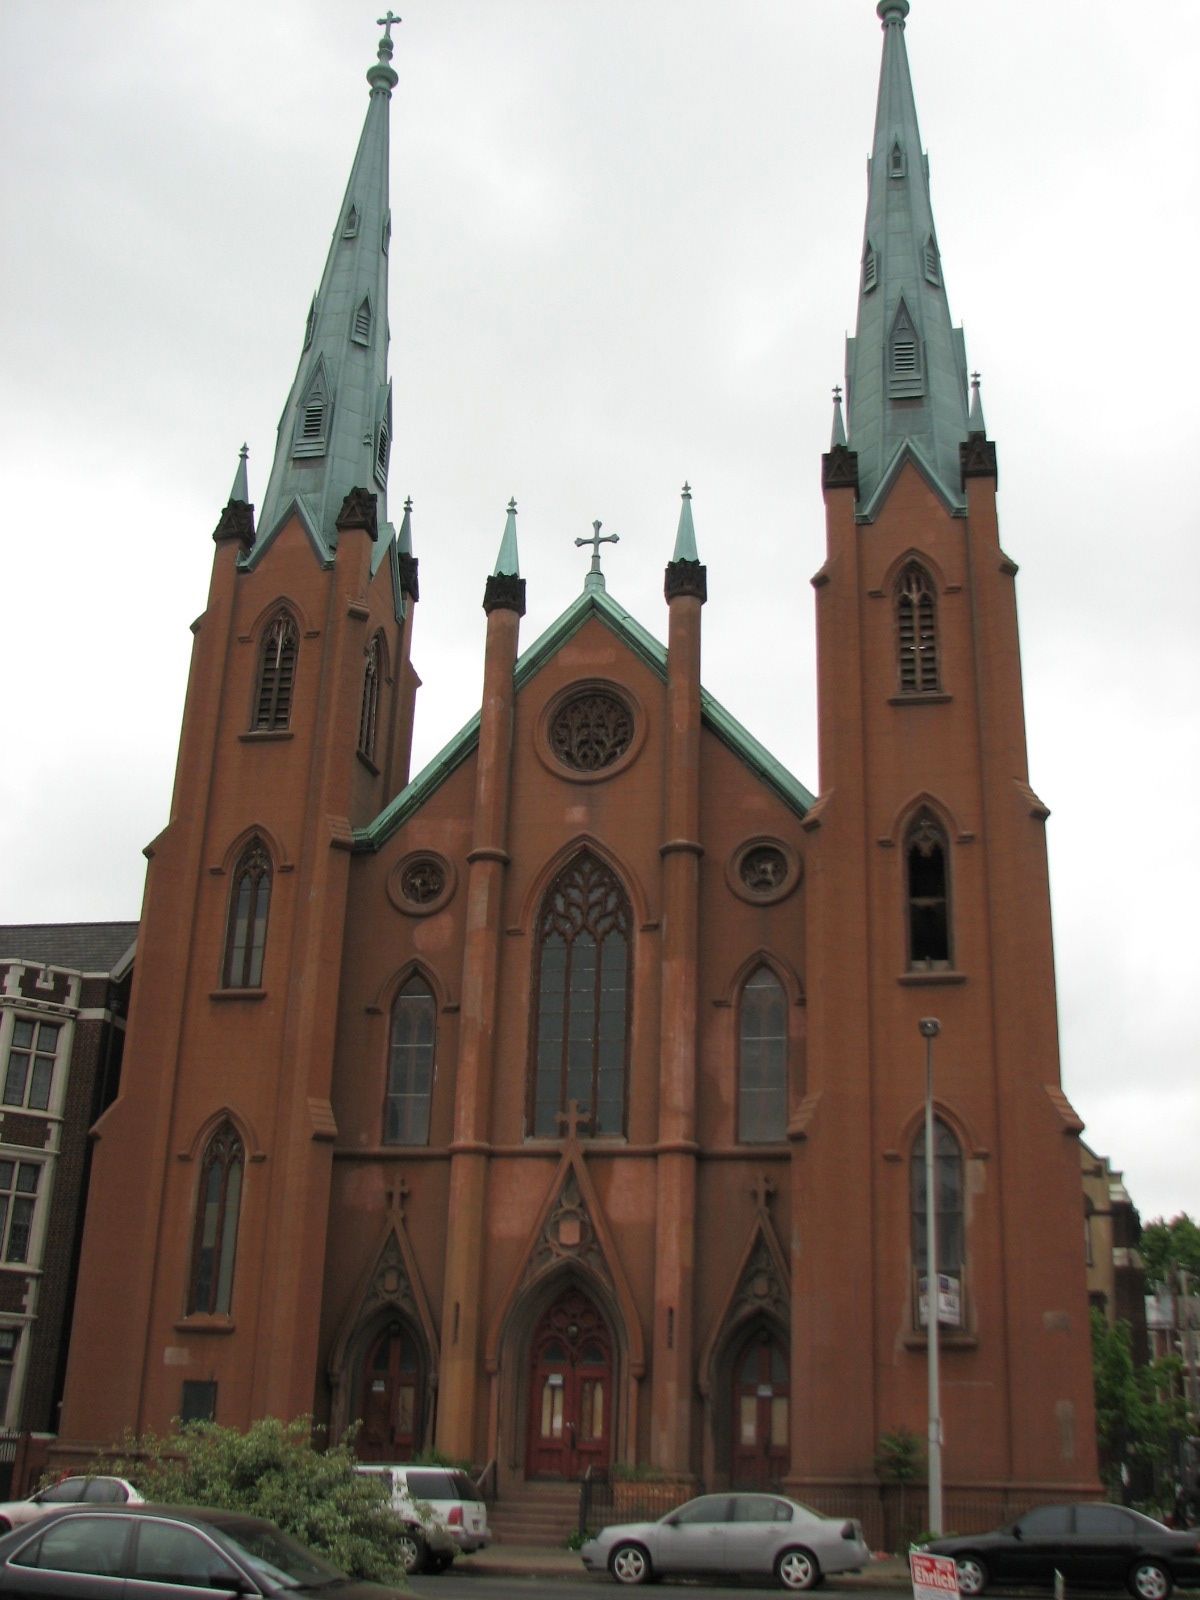 The Church of the Assumption, 1123-33 Spring Garden St., was designated historic by the city in May 2009.